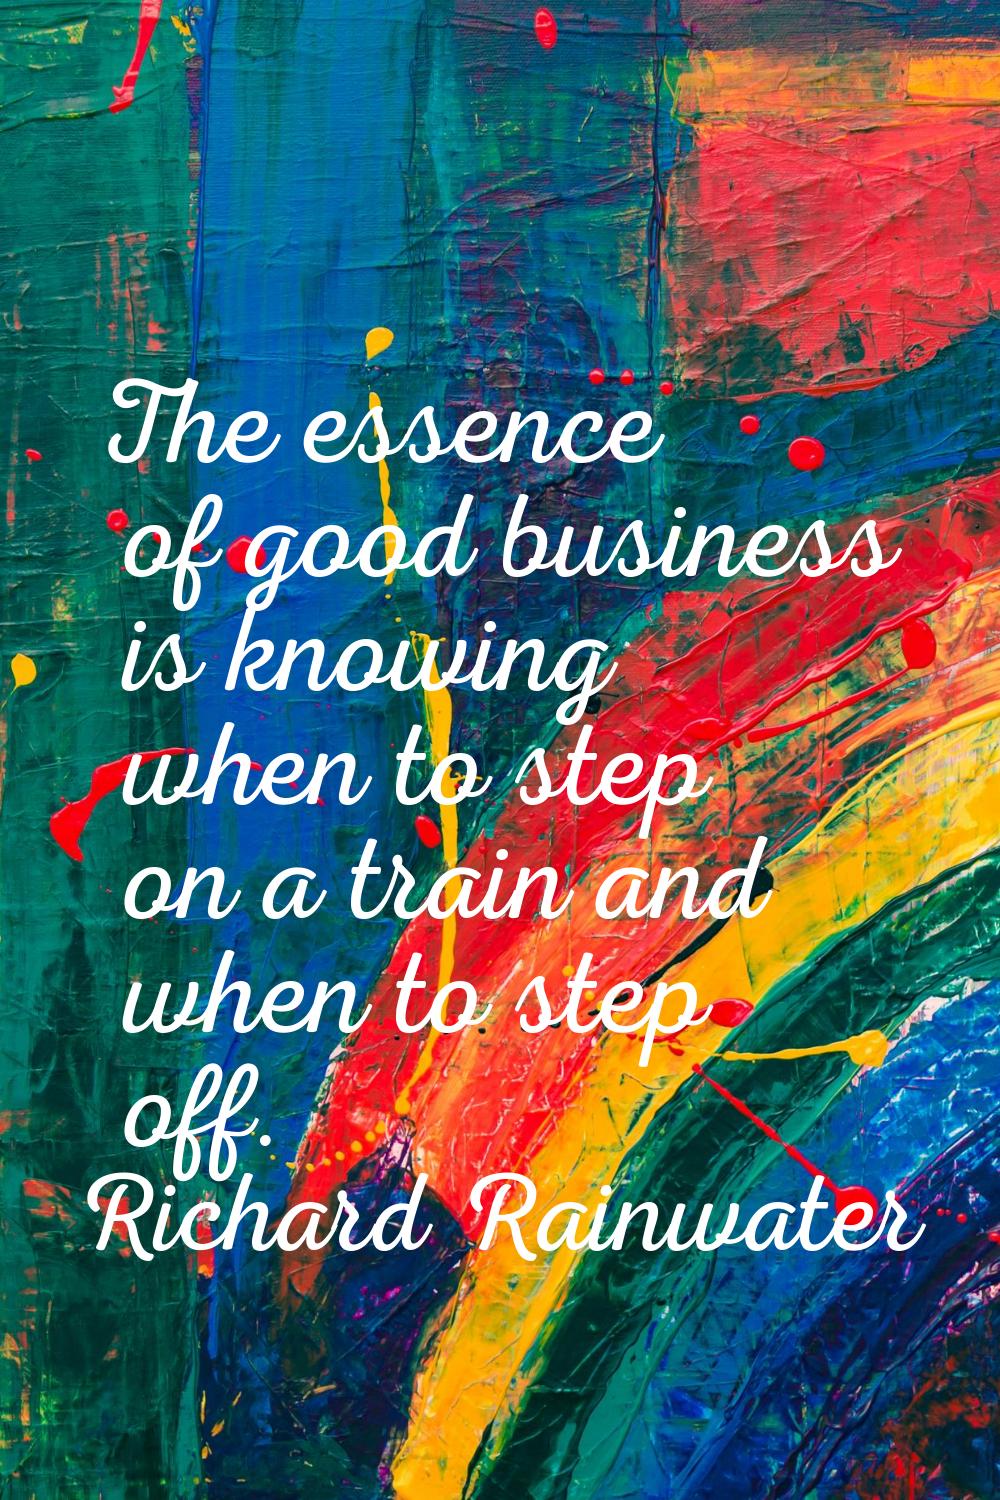 The essence of good business is knowing when to step on a train and when to step off.